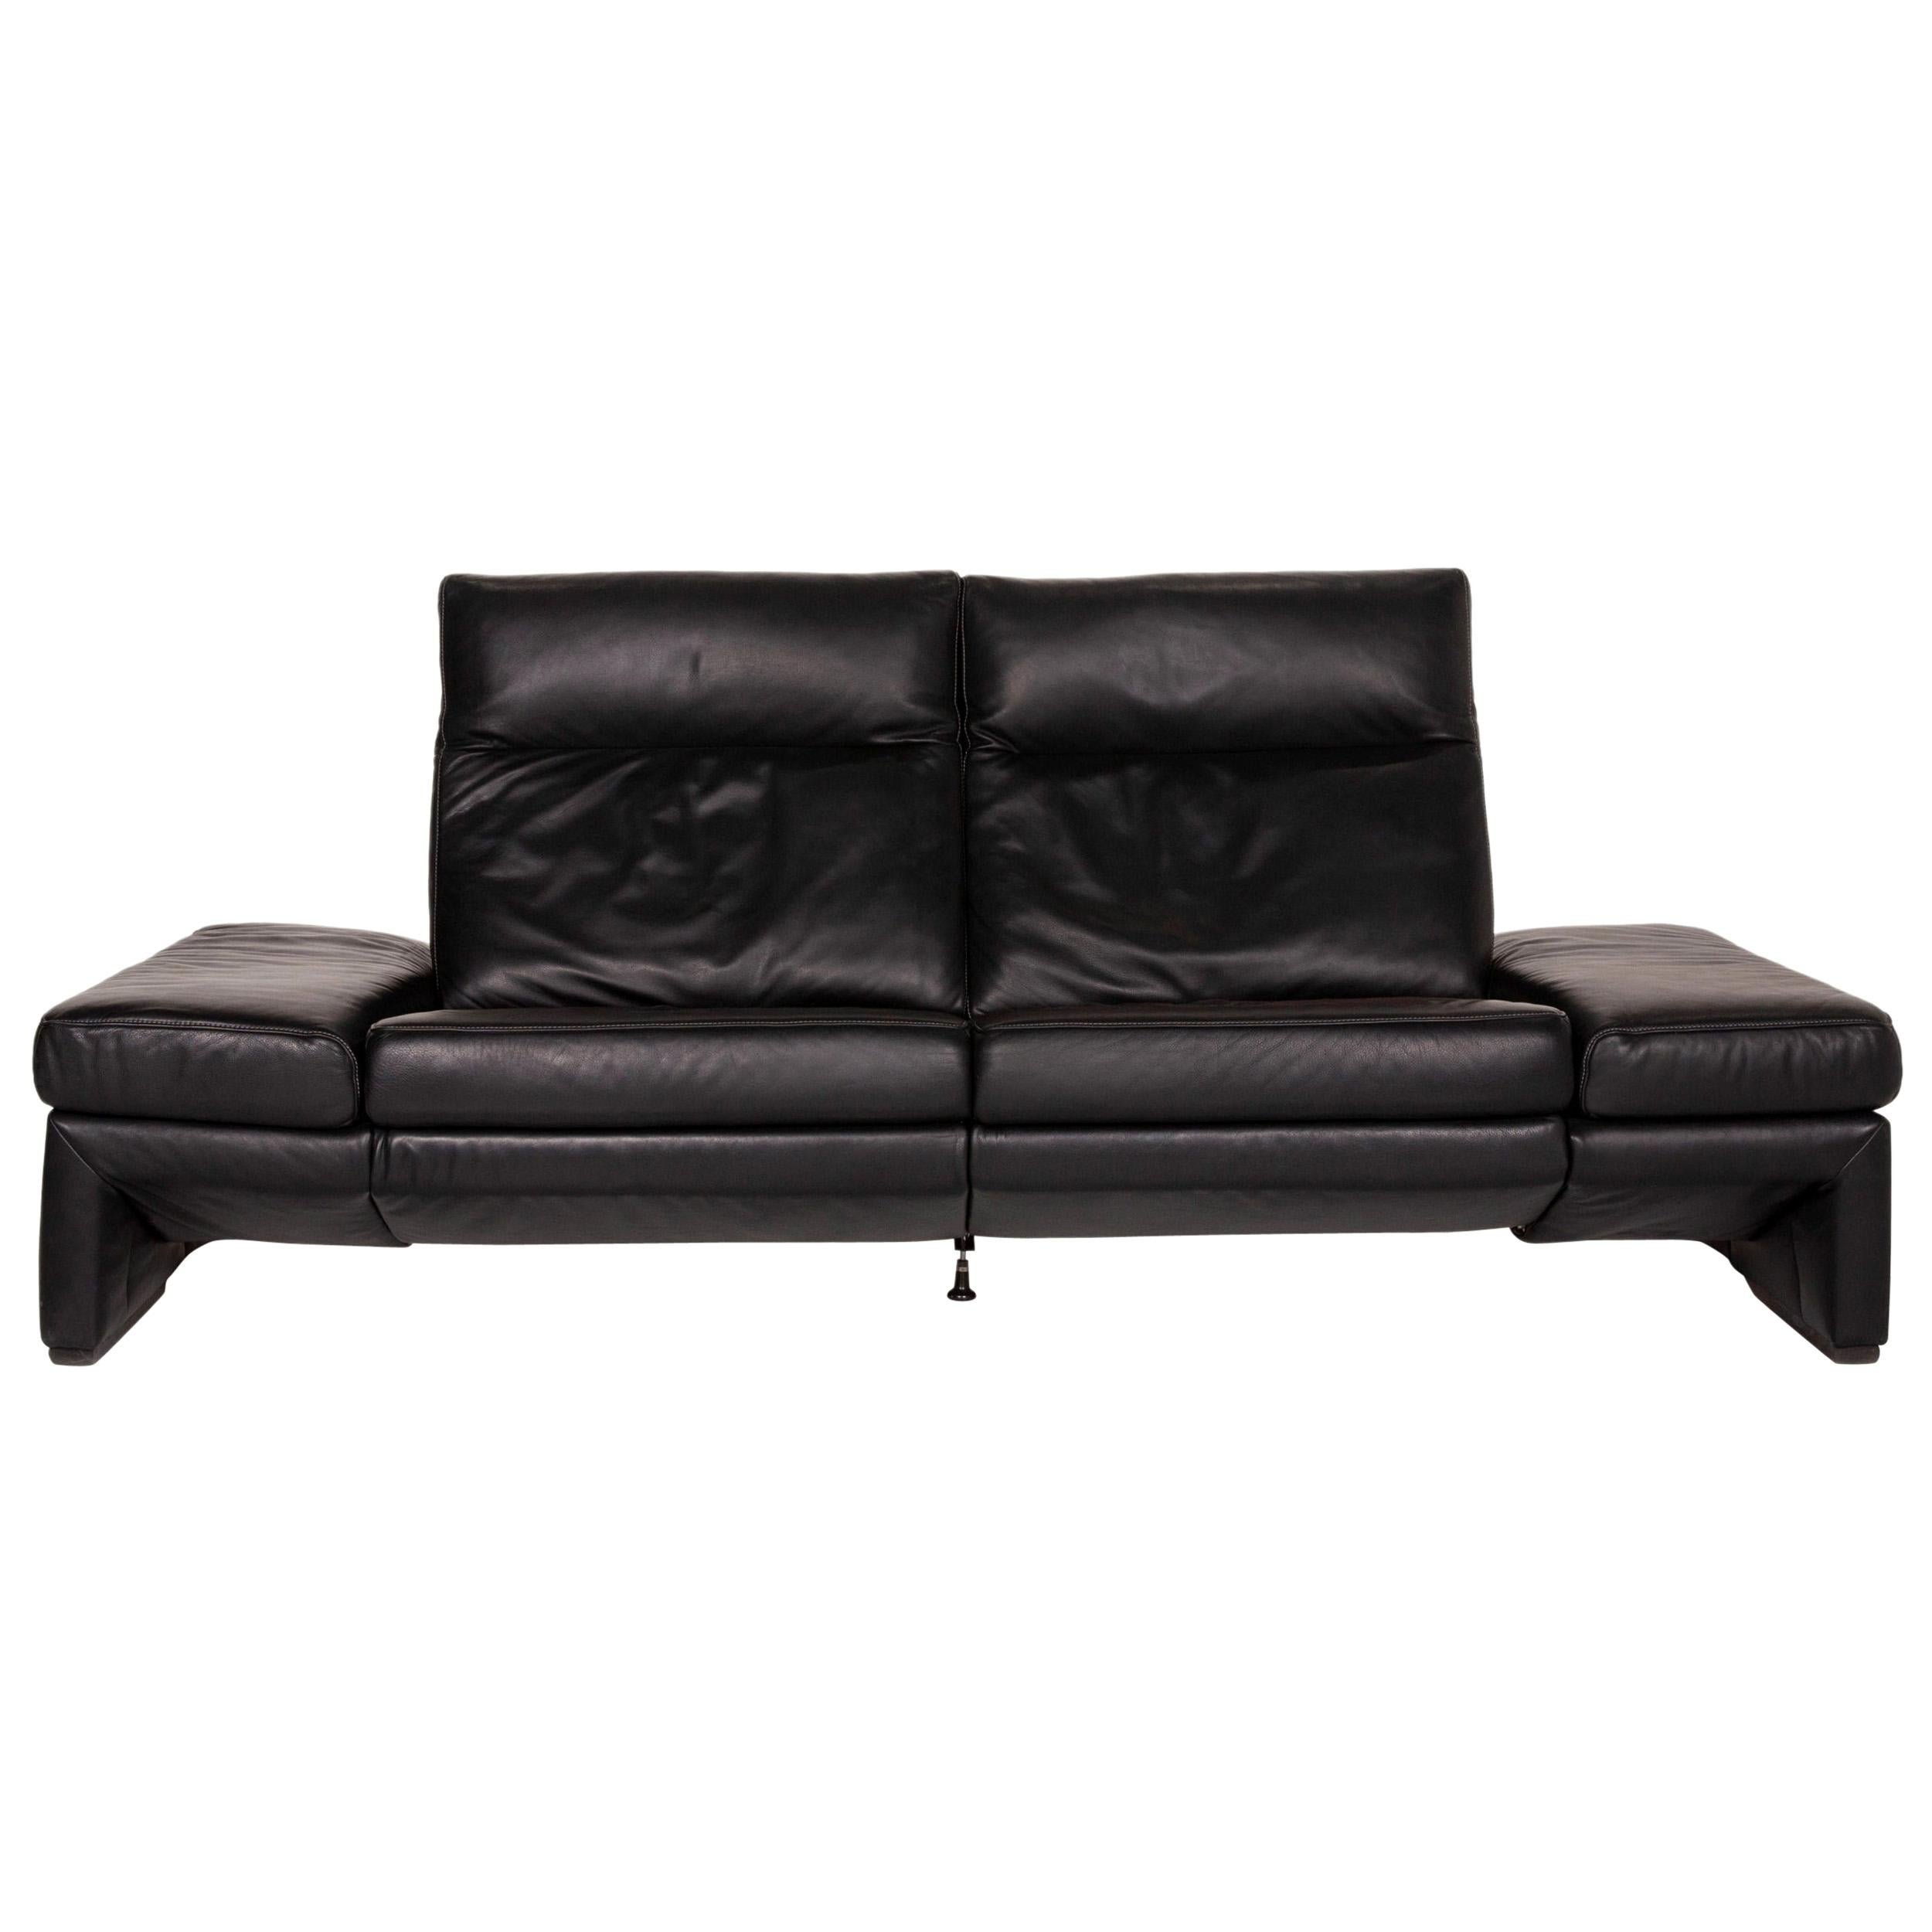 Mondo Leather Sofa Black Three-Seat Electrical Function Relaxation Function